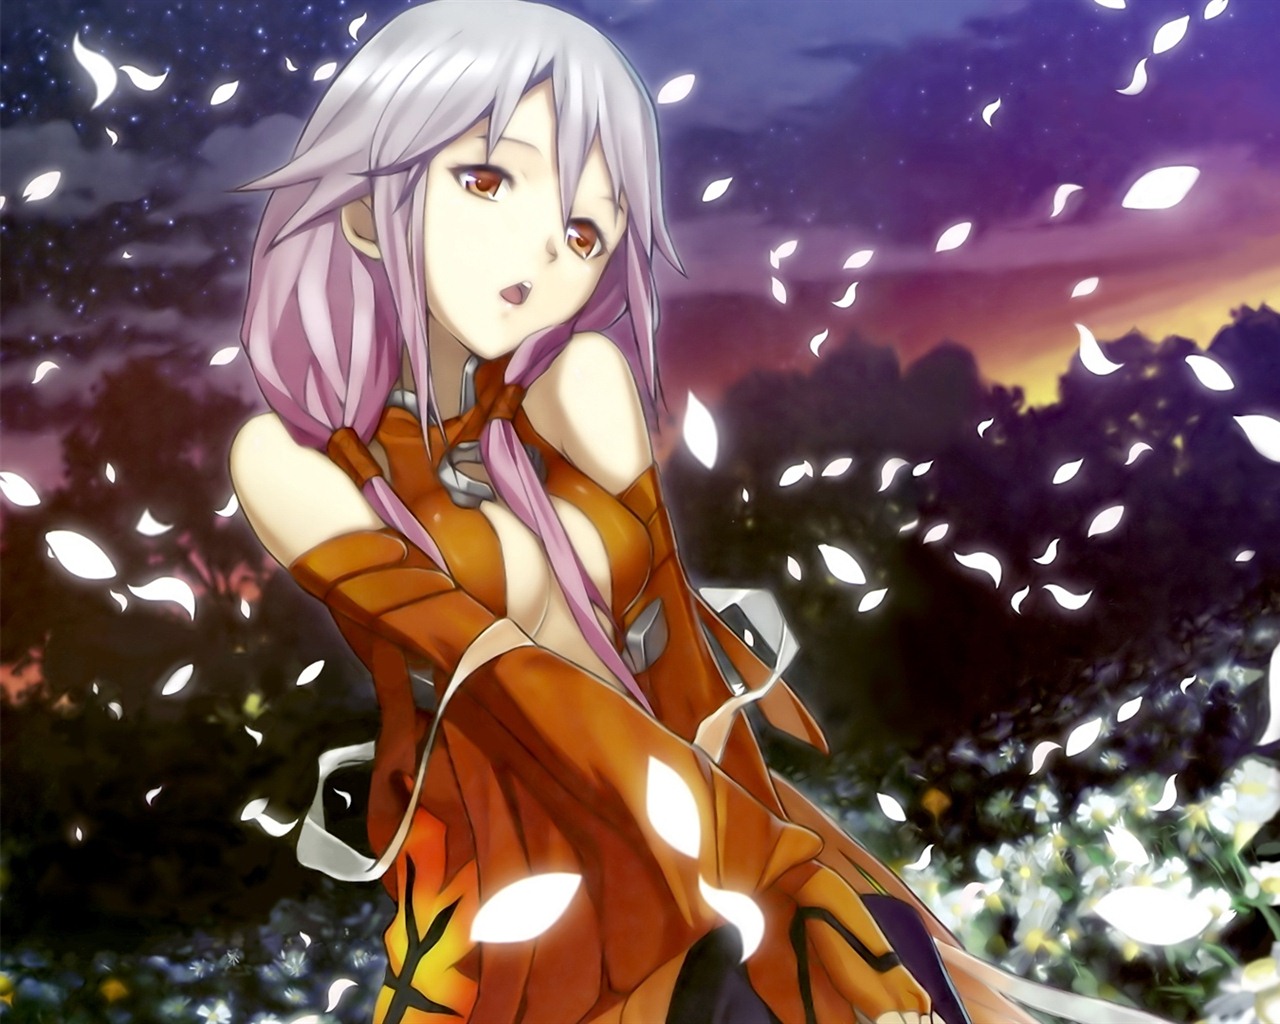 Guilty Crown 罪恶王冠 高清壁纸7 - 1280x1024